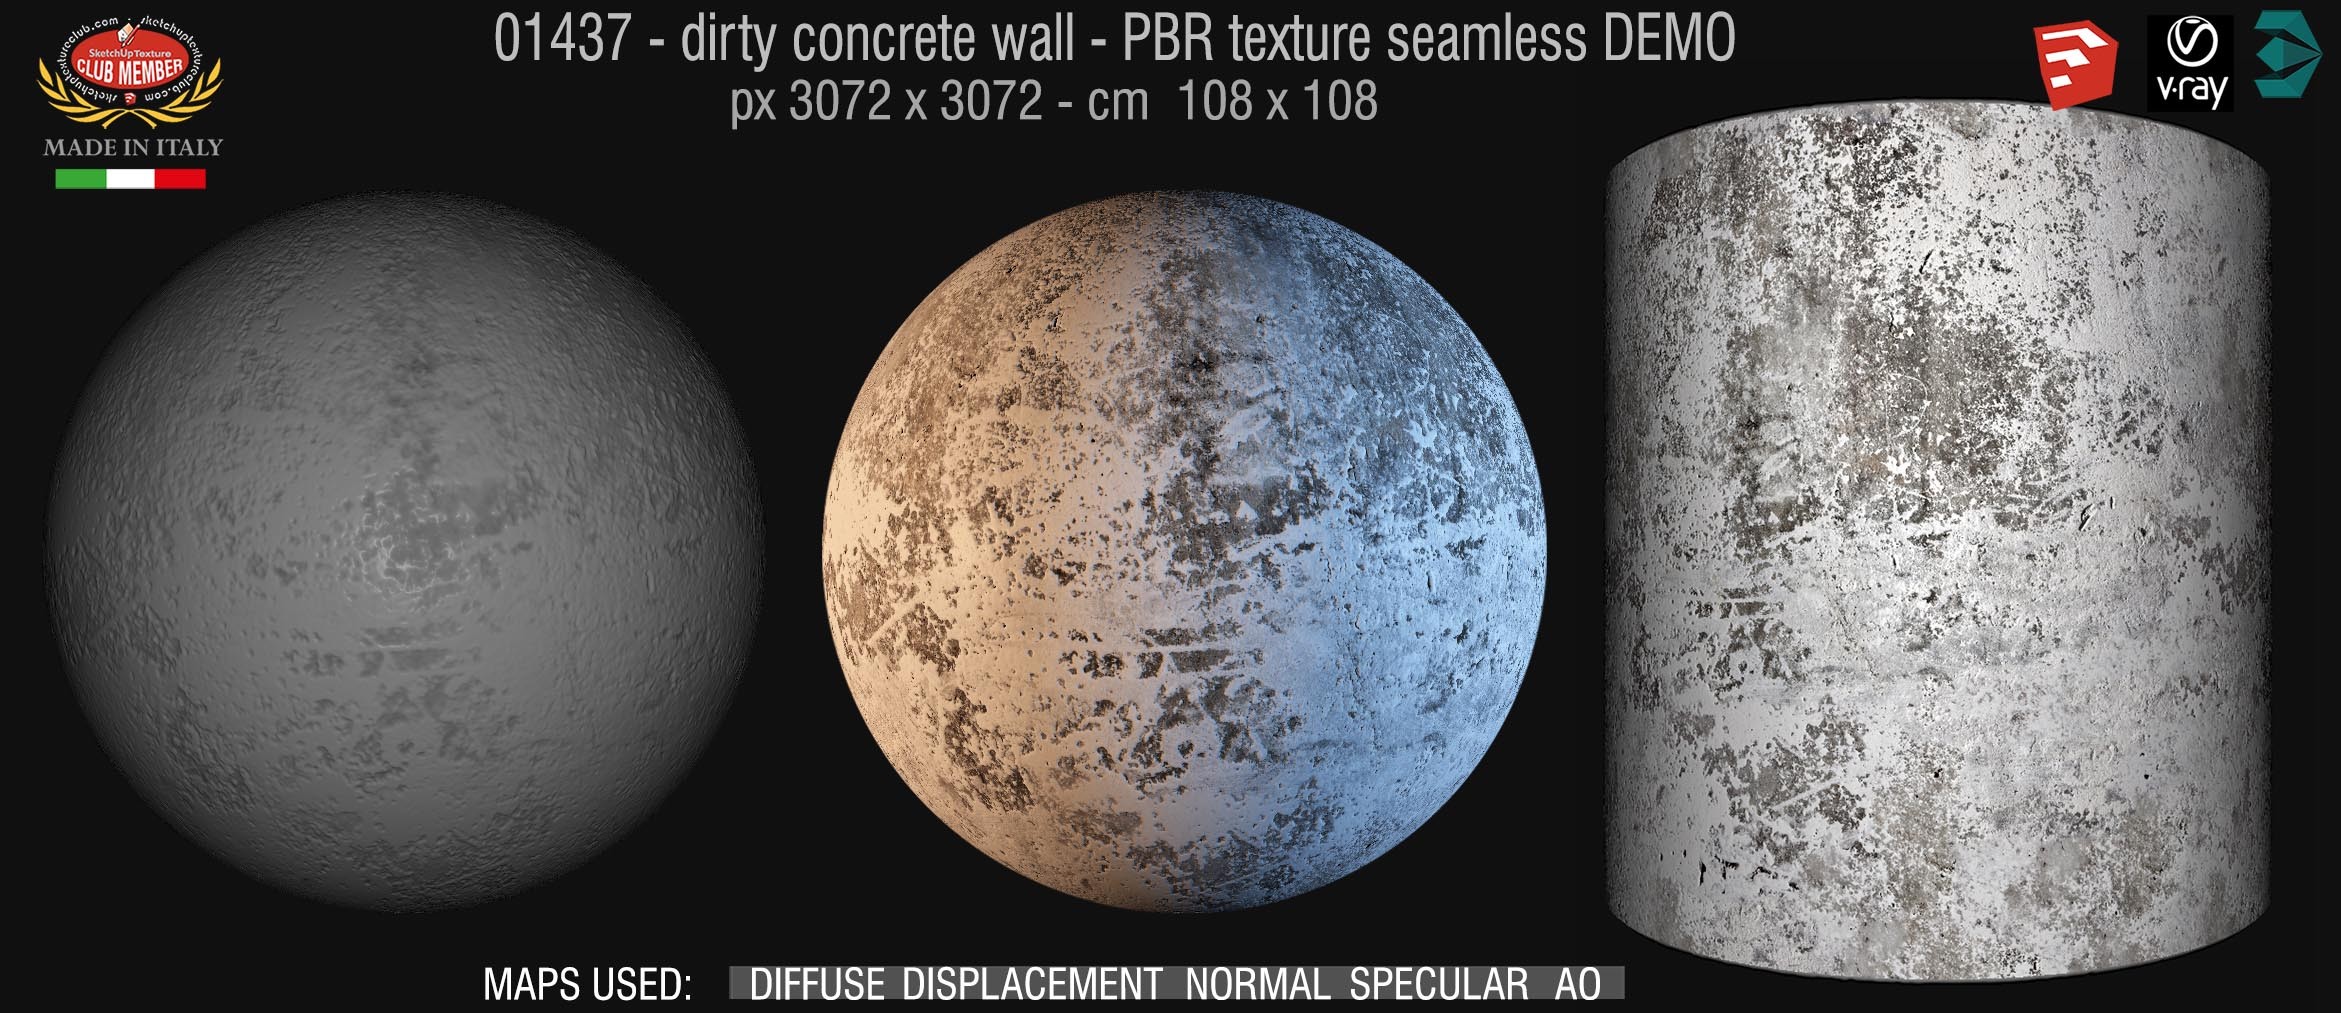 01437 Concrete bare dirty wall PBR texture seamless DEMO